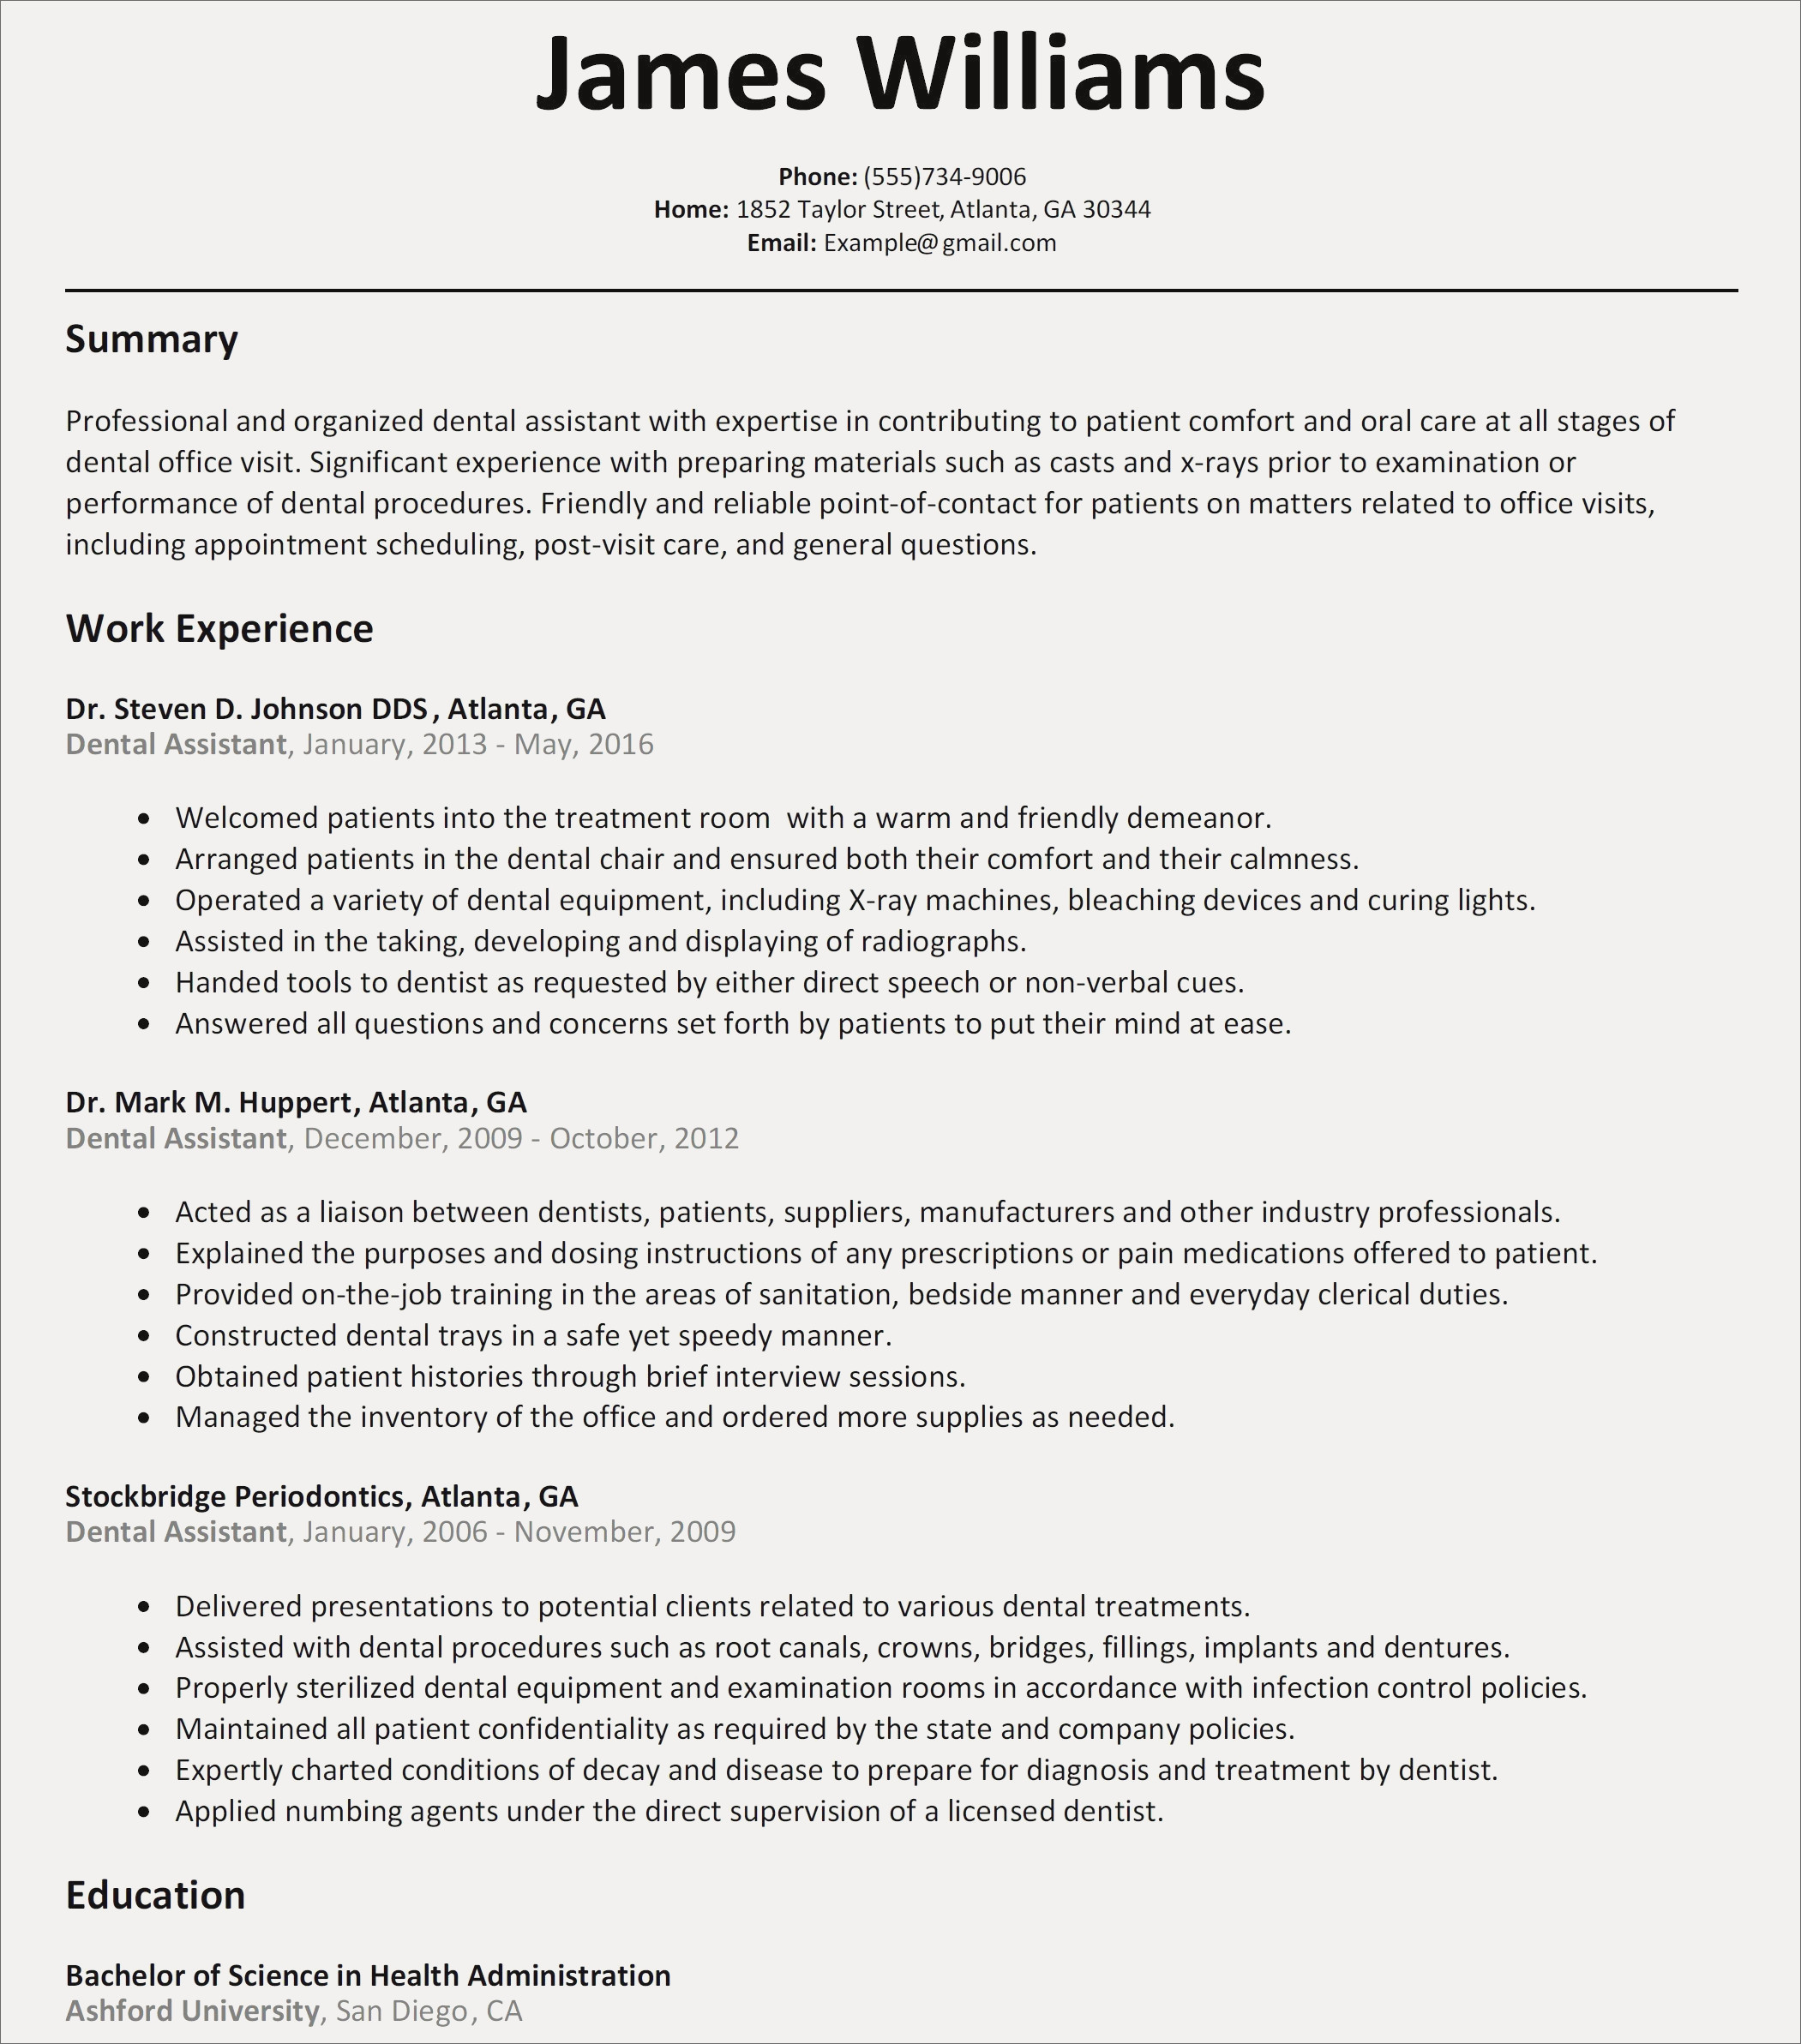 Resume Cover Letter Example Cover Letter Resume Examples New How To Write A For Australia Page Ex With No Experience Letters Example Application Job Retail Uk Internship Canada resume cover letter example|wikiresume.com